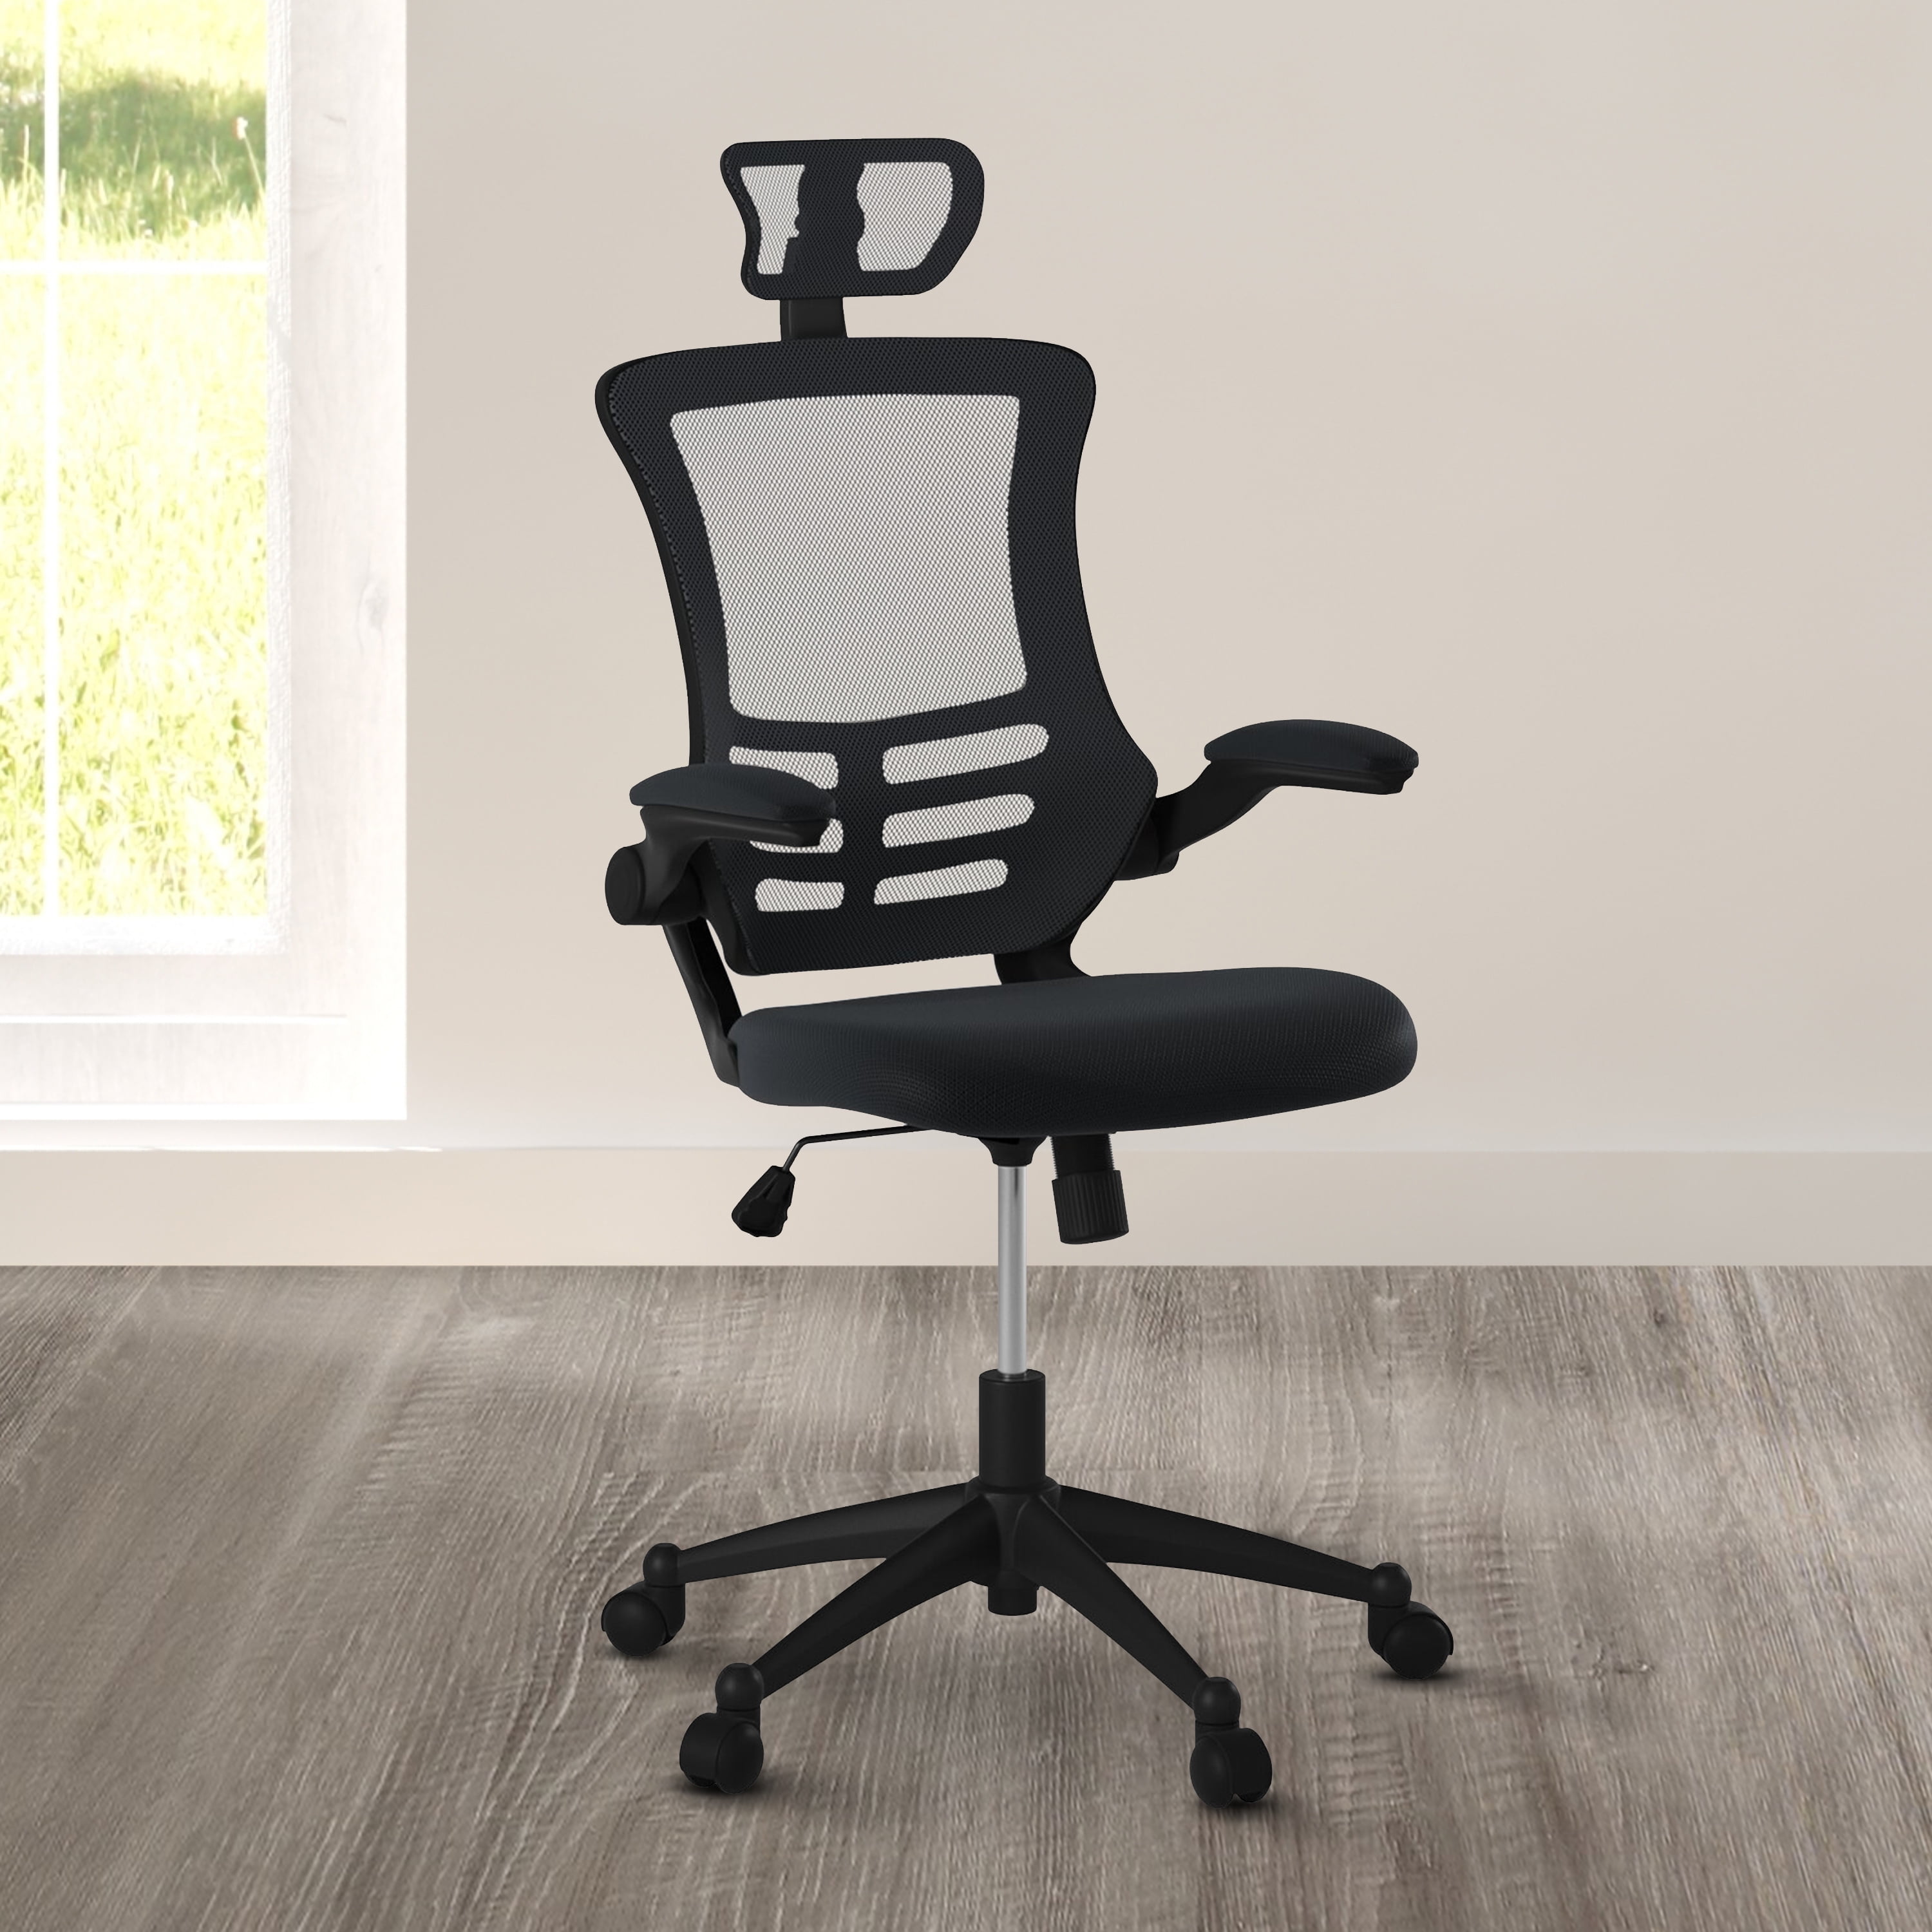 Details about   Techni Mobili Task Office Chair Swivel Reclining Adjustable Height Fabric Black 